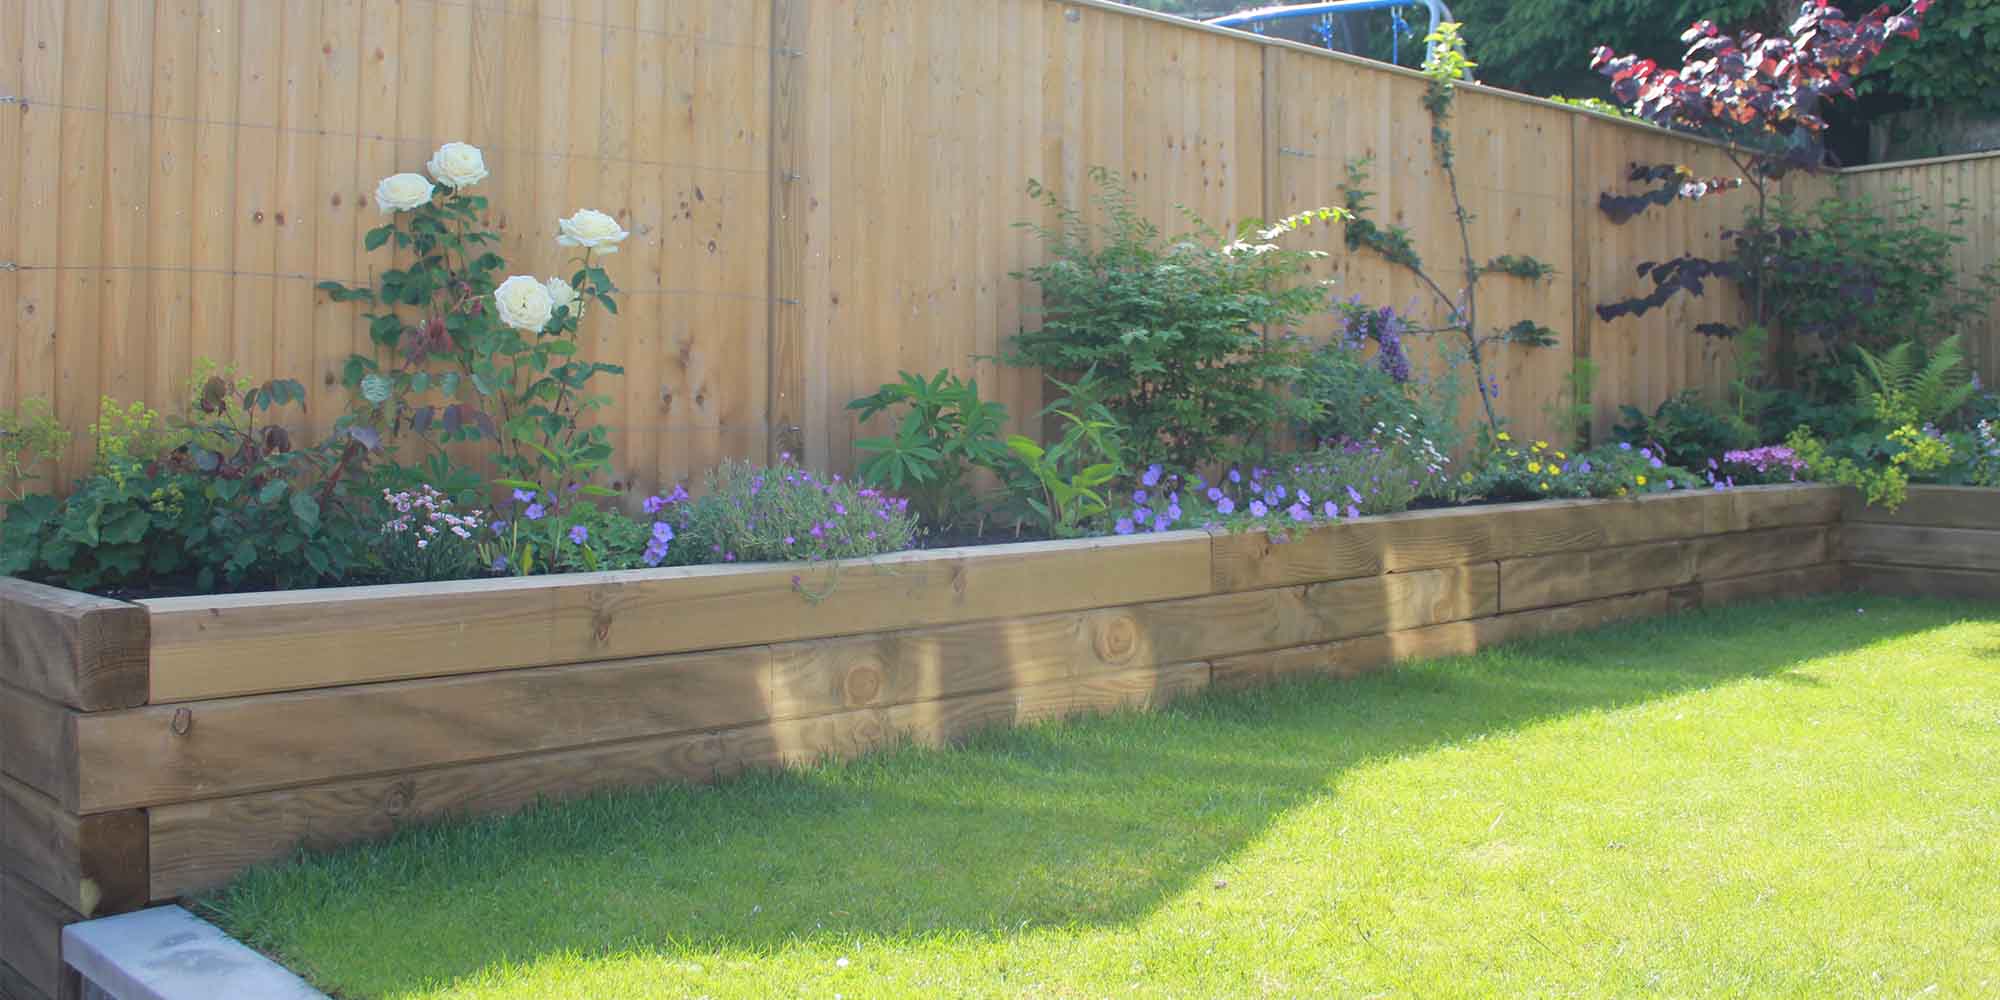 How To Build A Raised Garden Bed With Sleepers Encycloall